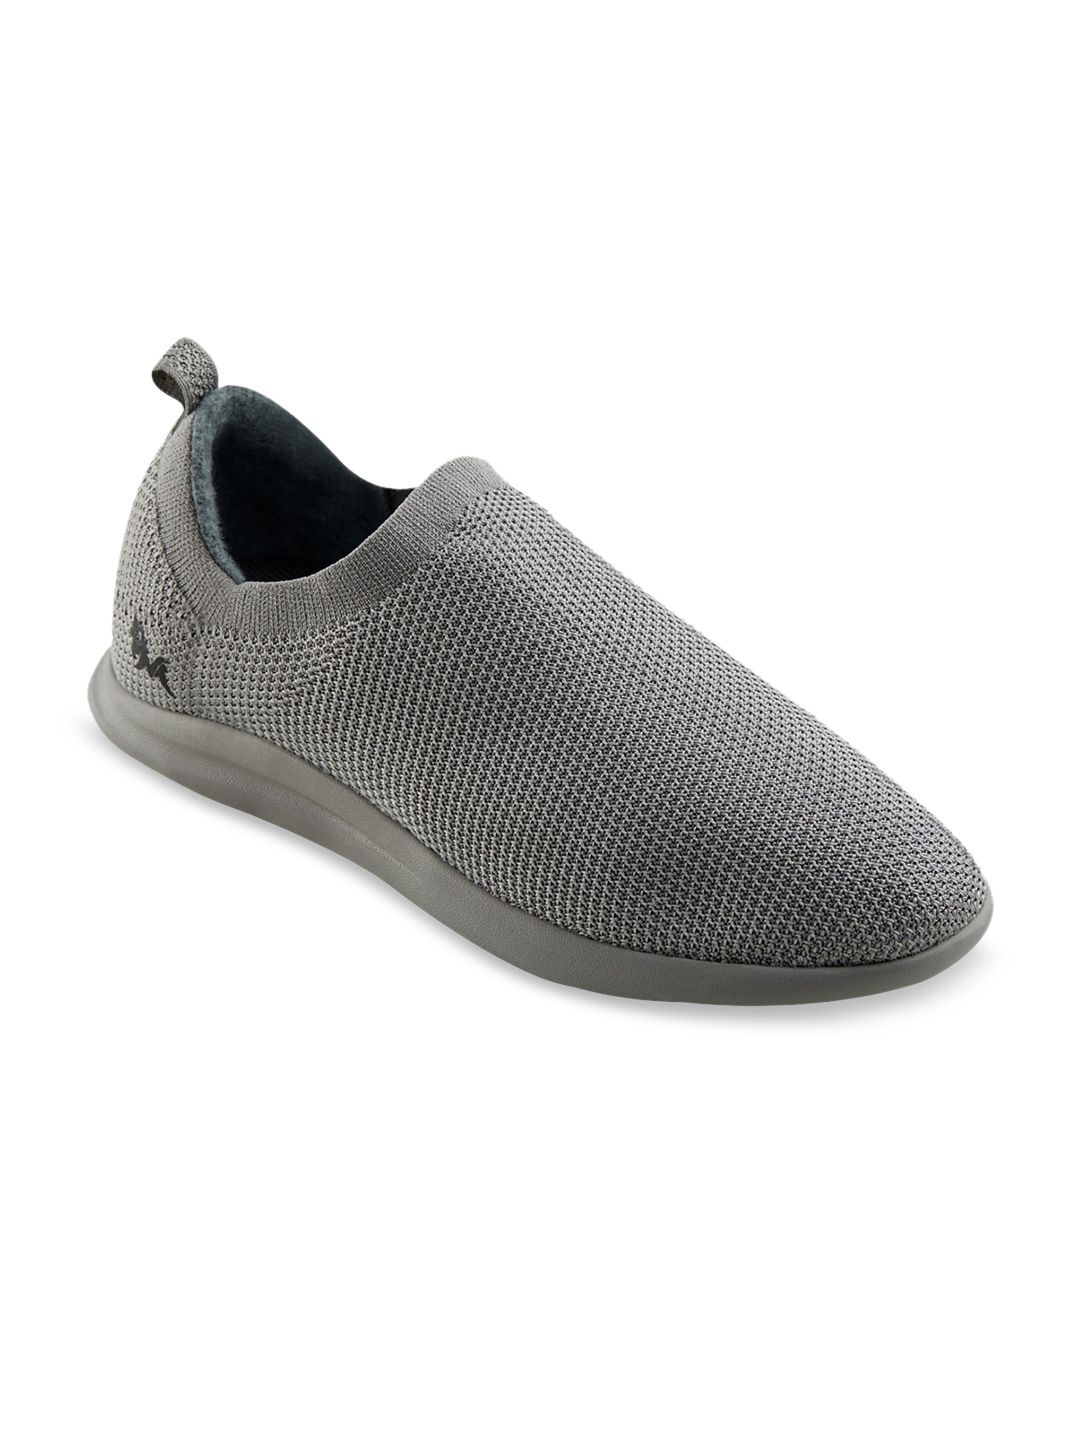 NEEMANS Unisex Grey Re-Live Knit Slip On Sneakers Price in India